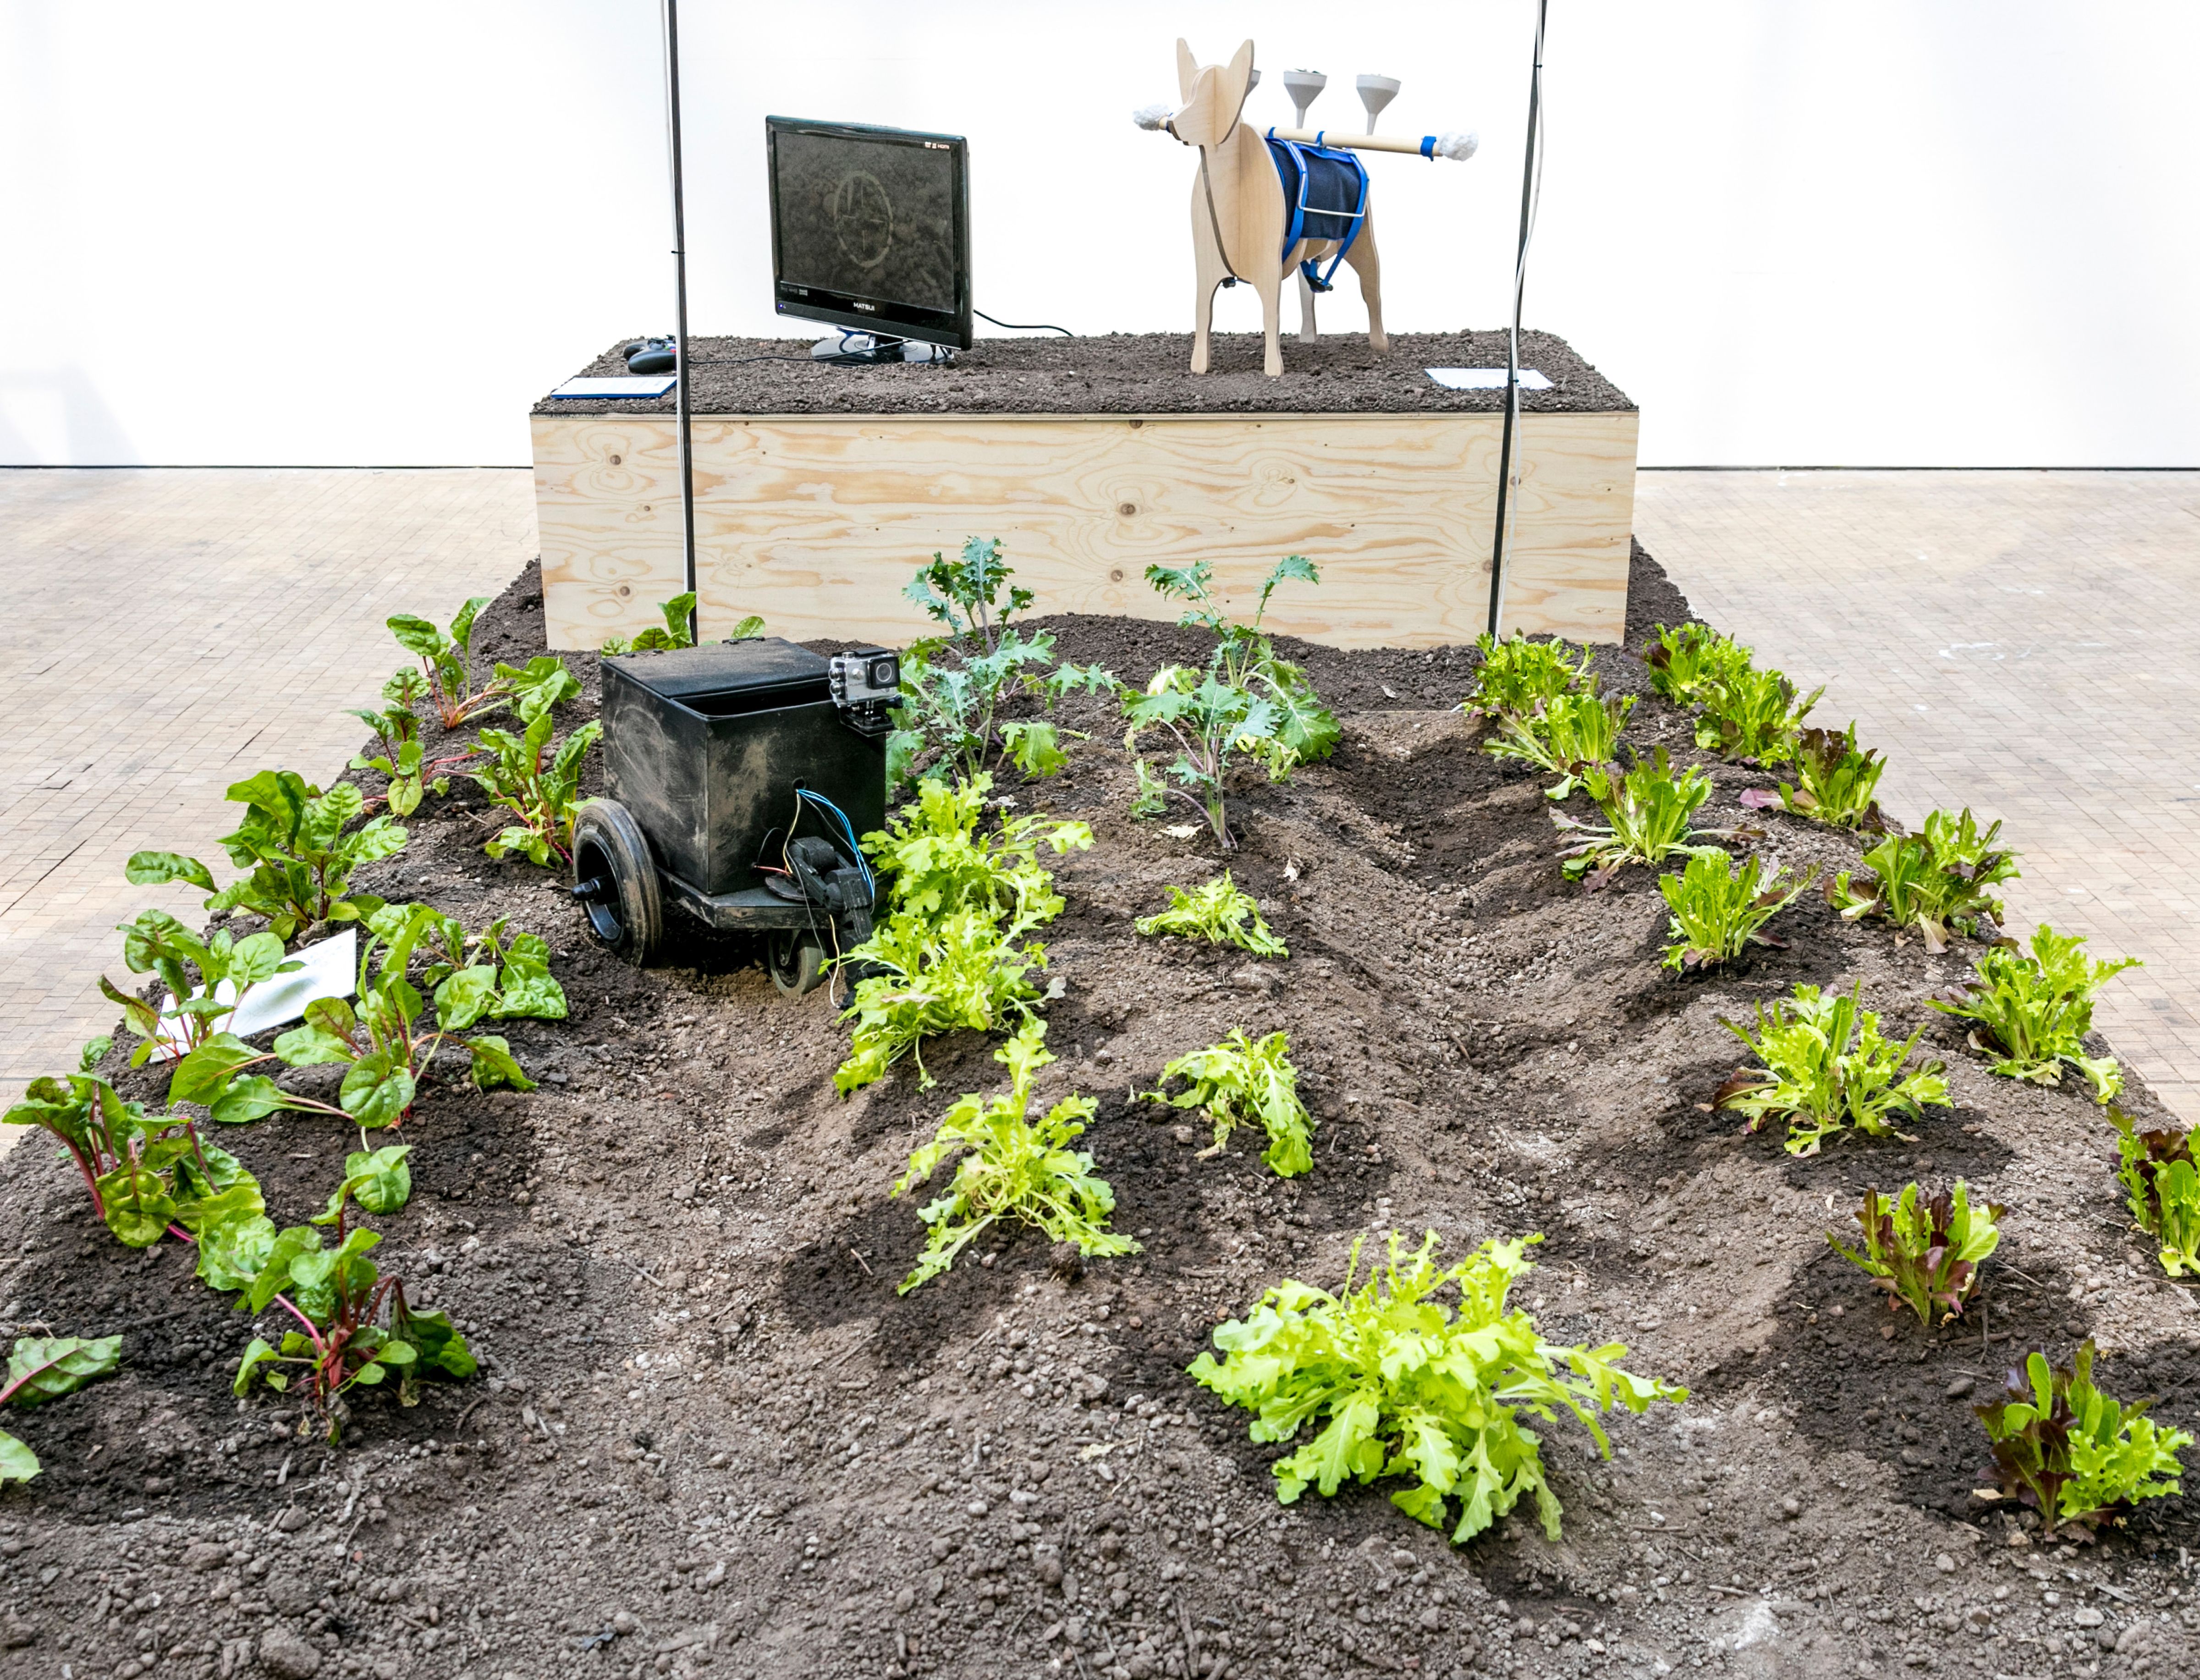 An installation with a patch of soil and plants growing. There is a wooden raised stand at the back with a wooden dog carrying filter-like shapes on its back. There is a monitor at the back showing a shot of the plant patch which is coming from a camera attached to a cube robot. 